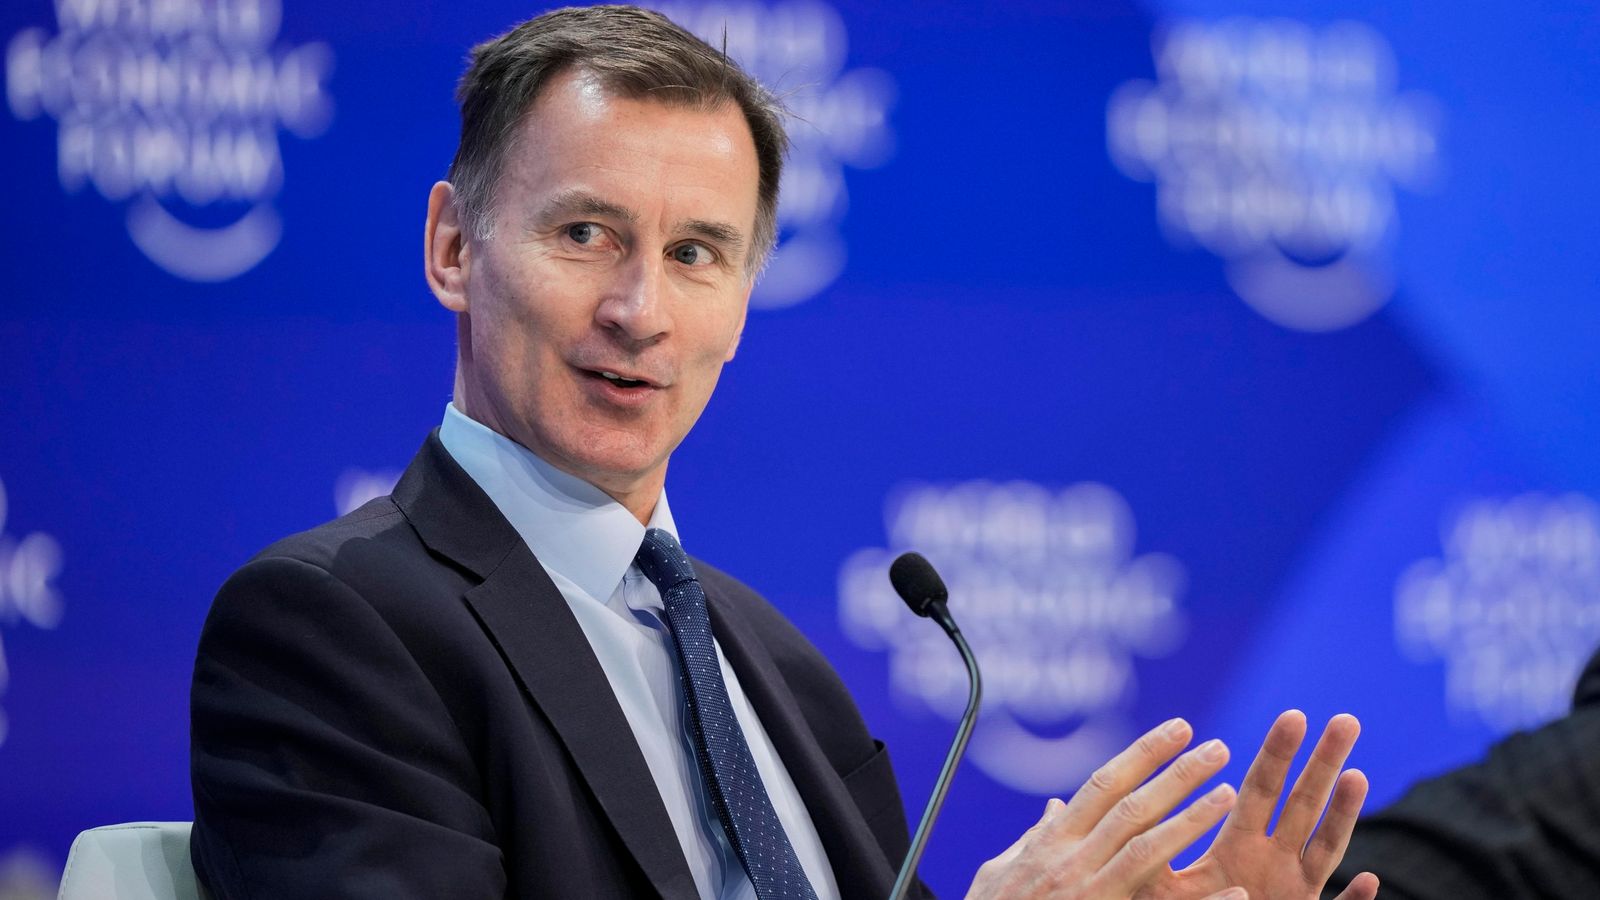 Davos: Jeremy Hunt signals tax-cutting budget ahead to help drive growth